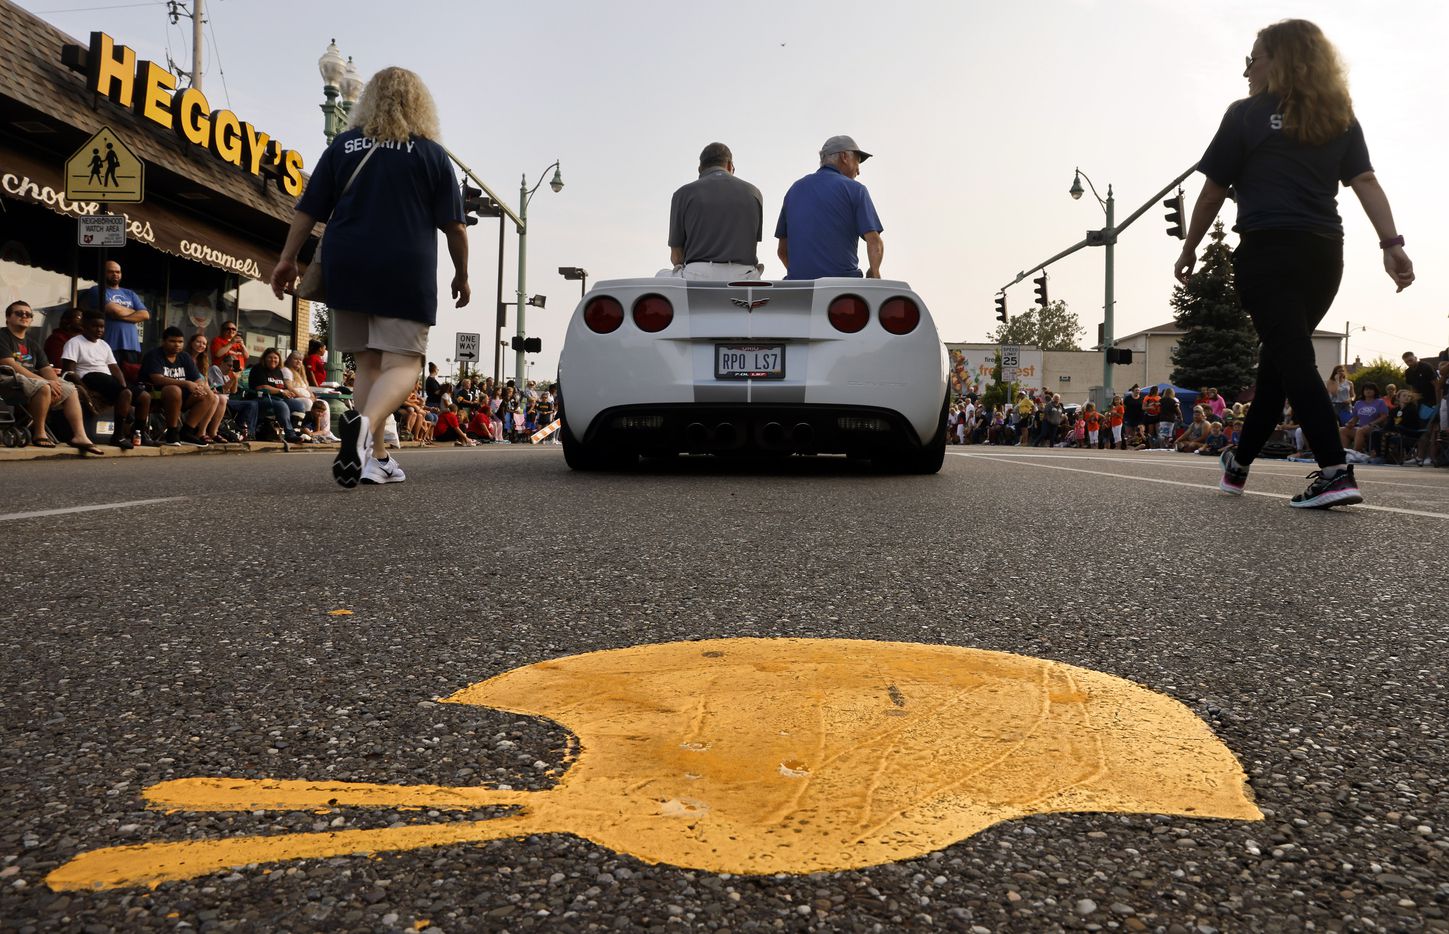 Dallas Cowboys Pro Football Hall of Fame inductee Cliff Harris (right, in car) and former Cowboys safety Charlie Waters follow the gold helmets marking the Canton Repository Grand Parade route in downtown Canton, Ohio, Saturday, August 7, 2021. The parade honored newly elected and former members of the Hall, including newcomers and former Dallas Cowboys players Cliff Harris, Drew Pearson and head coach Jimmy Johnson. (Tom Fox/The Dallas Morning News)